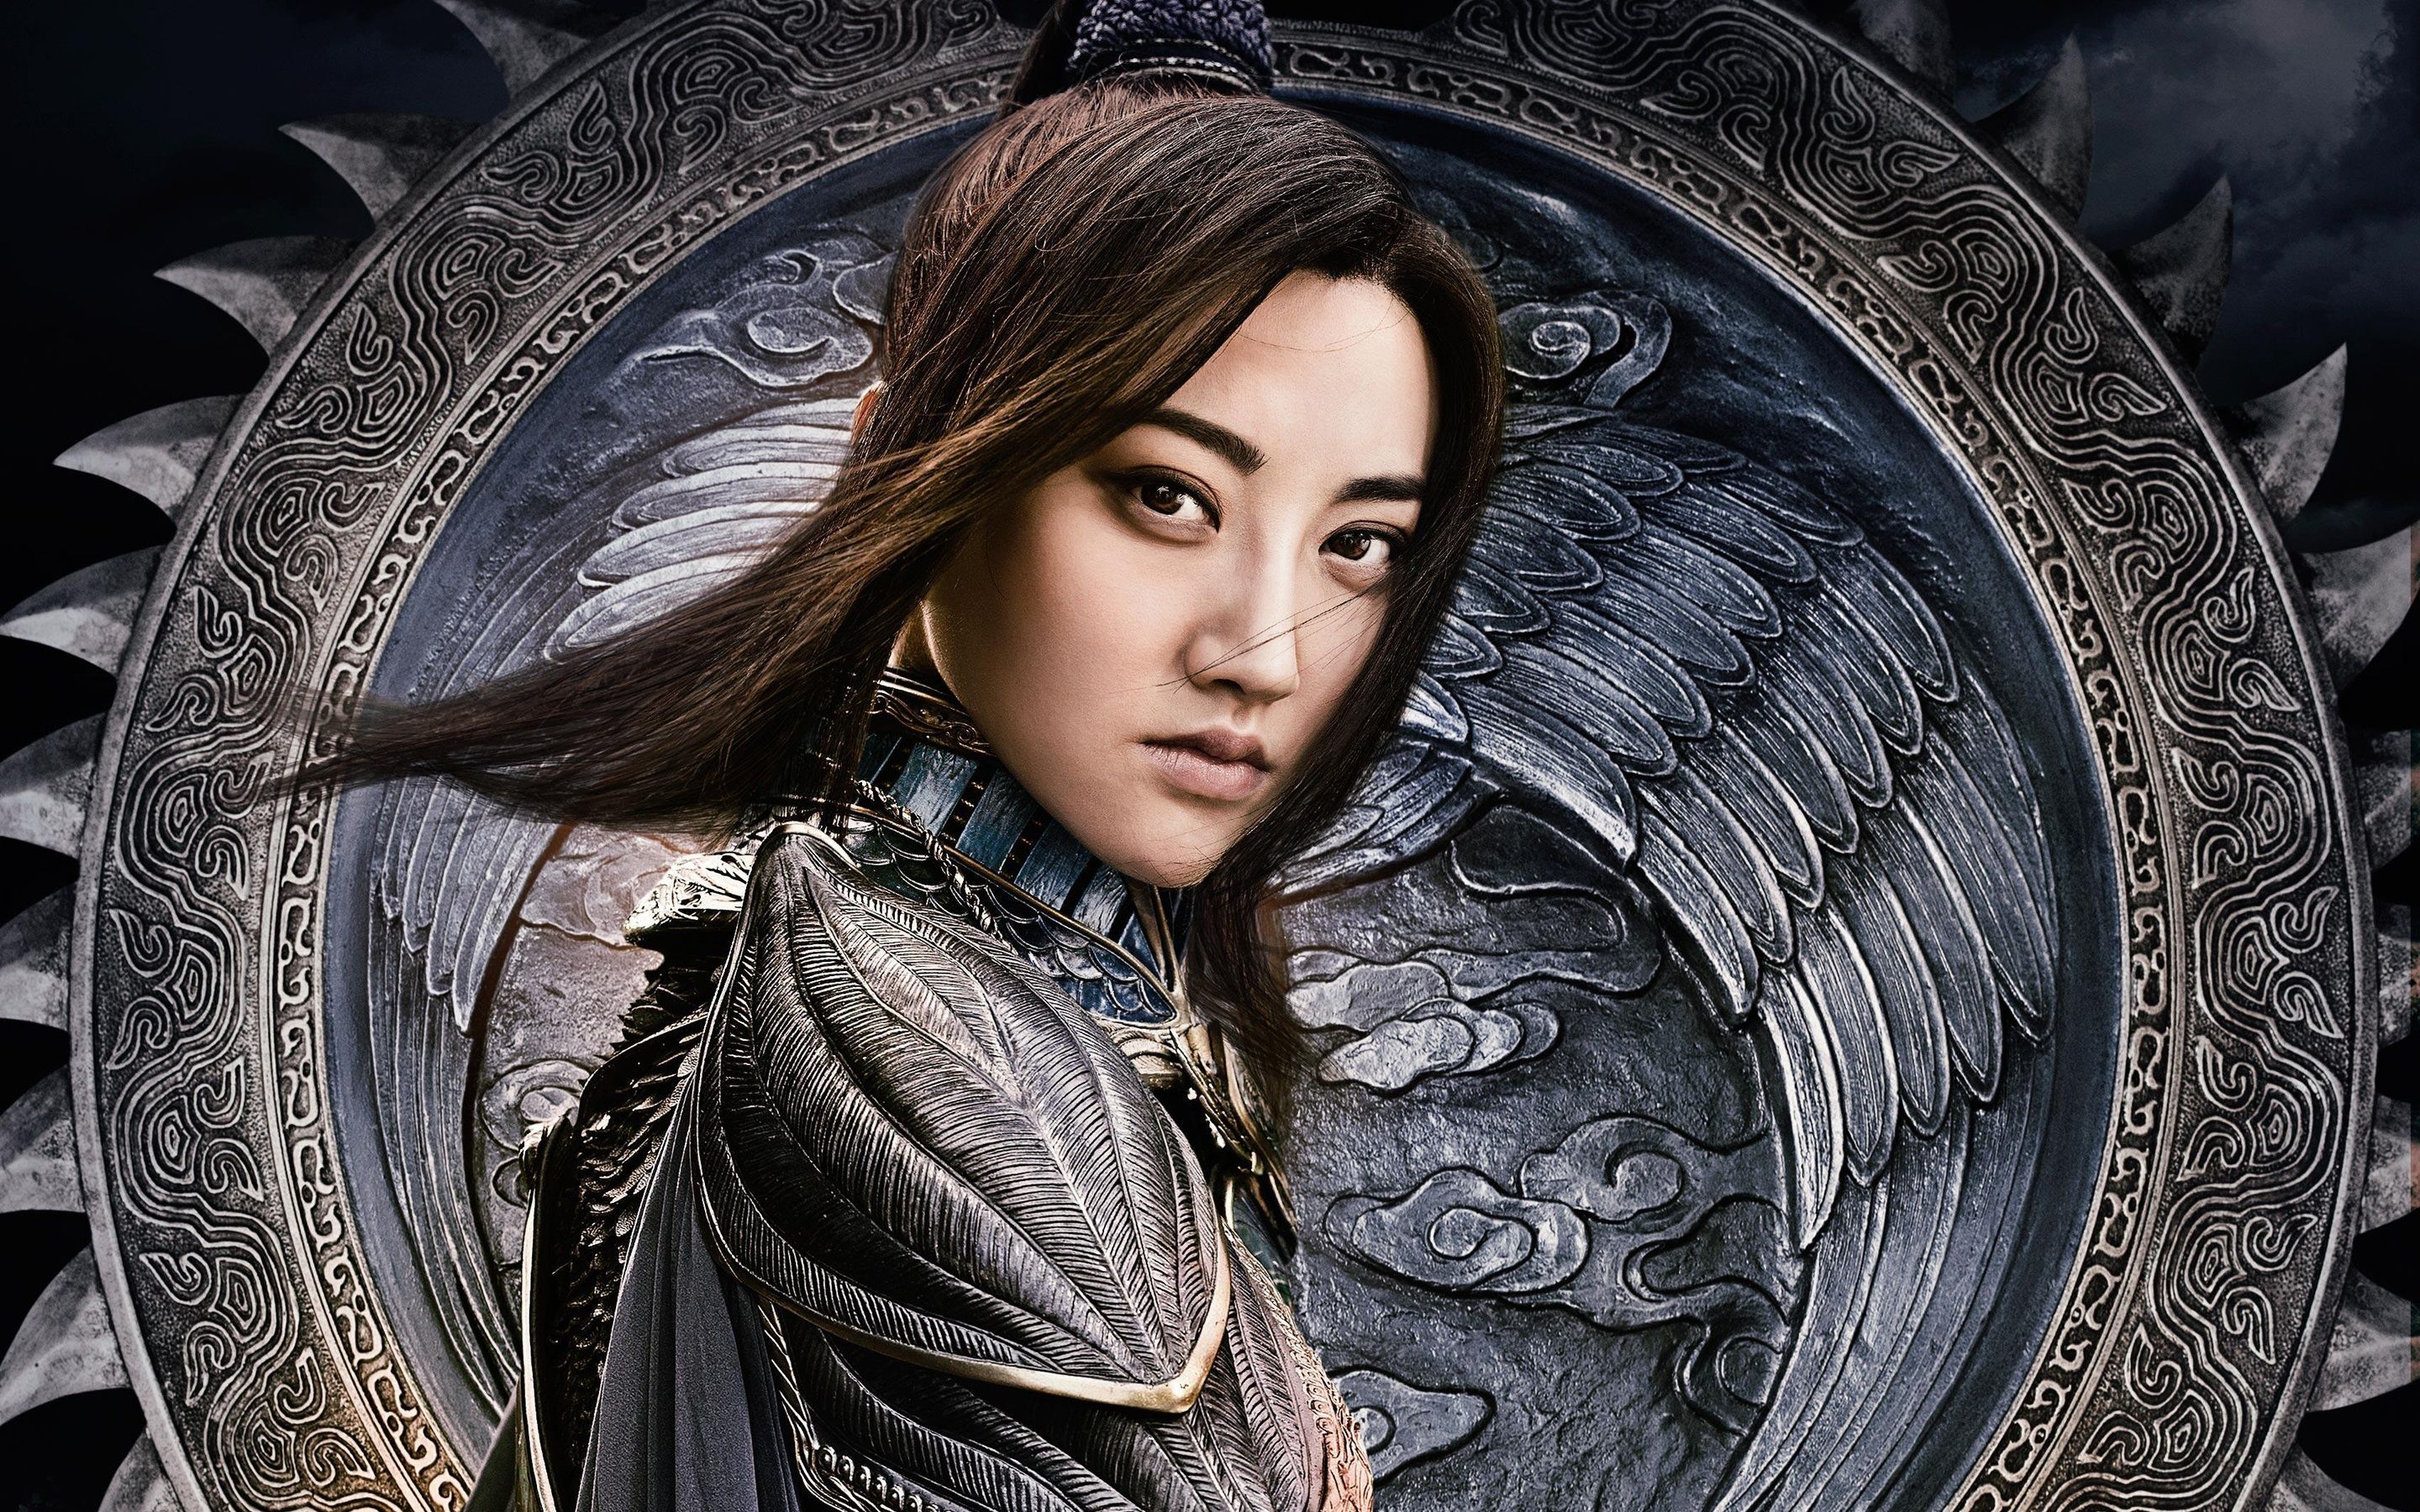 Wallpaper Tian Jing, The Great Wall 2880x1800 HD Picture, Image